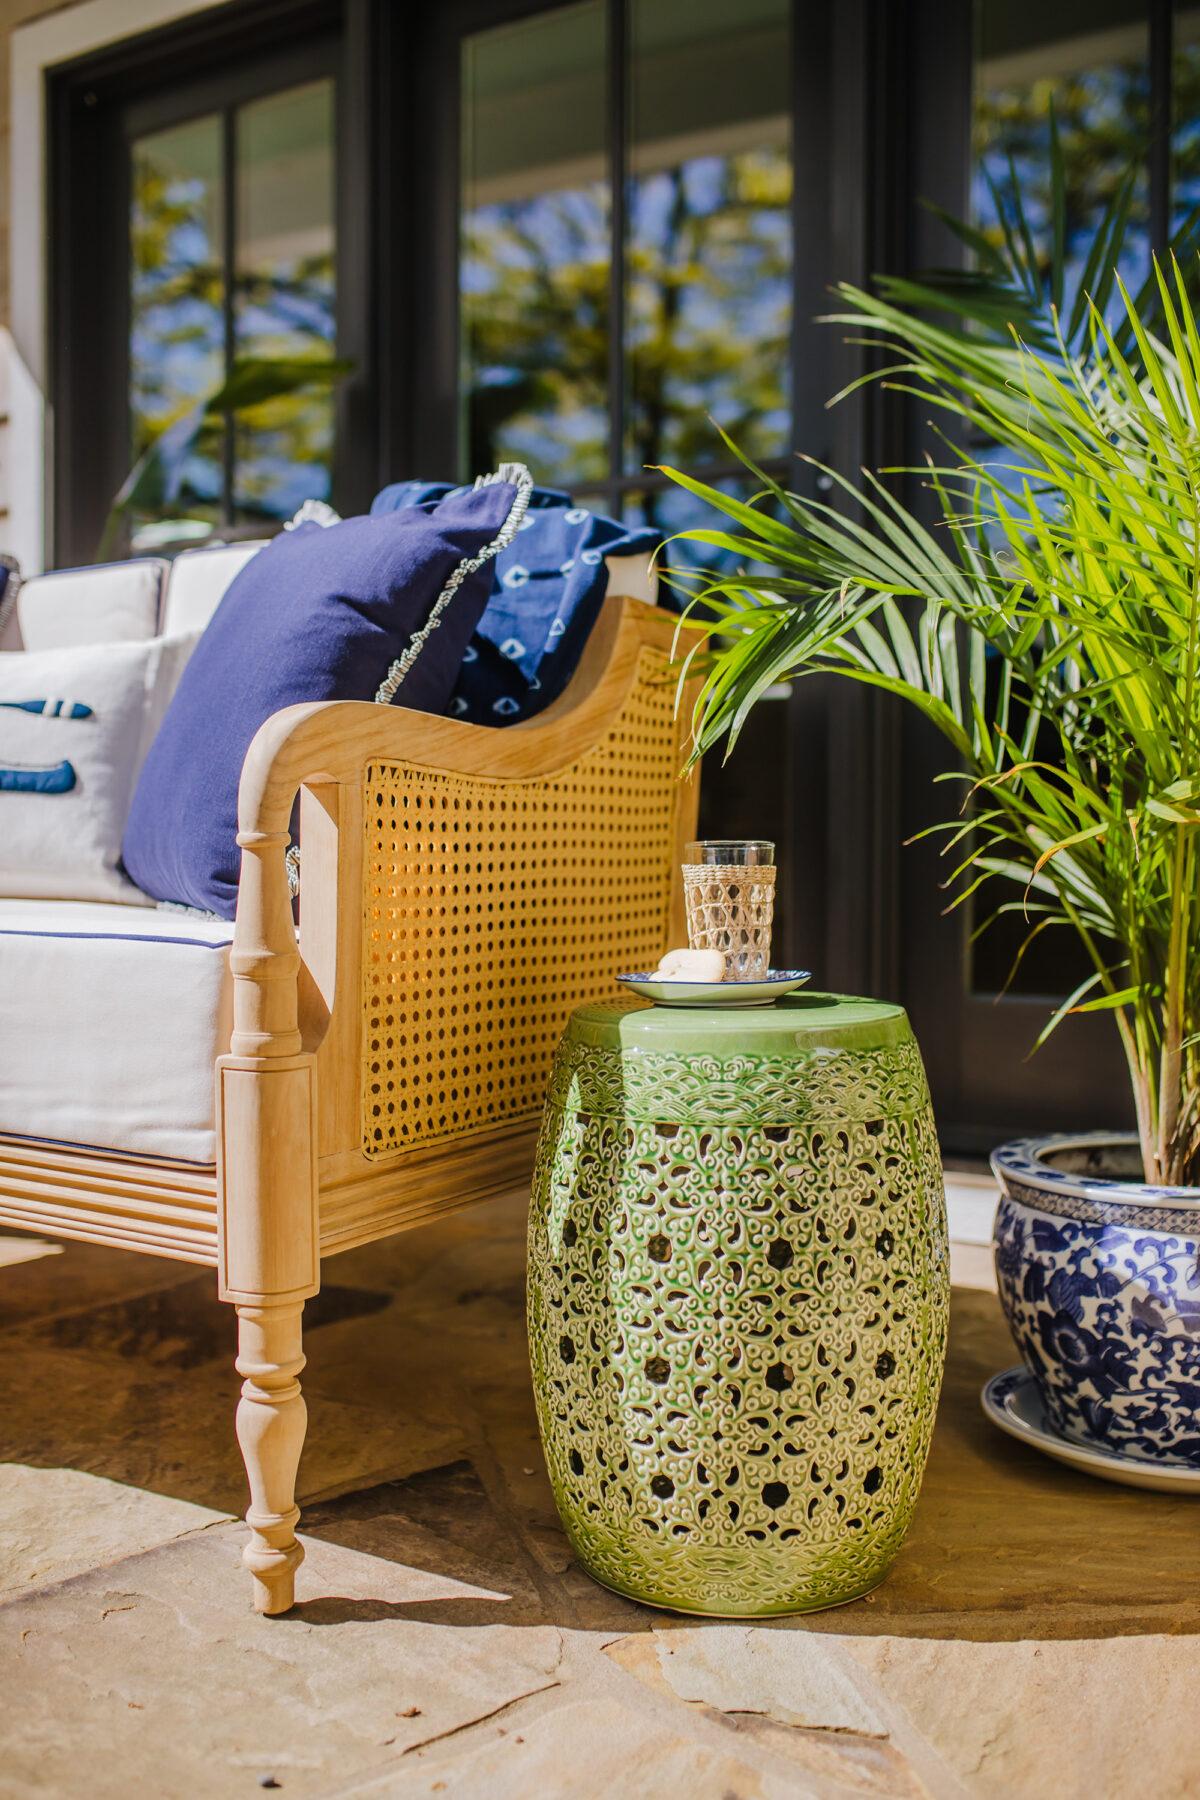 Few things complete an outdoor space like a set of garden stools and a group of beautiful outdoor pillows. (Nell Hill’s/TNS)